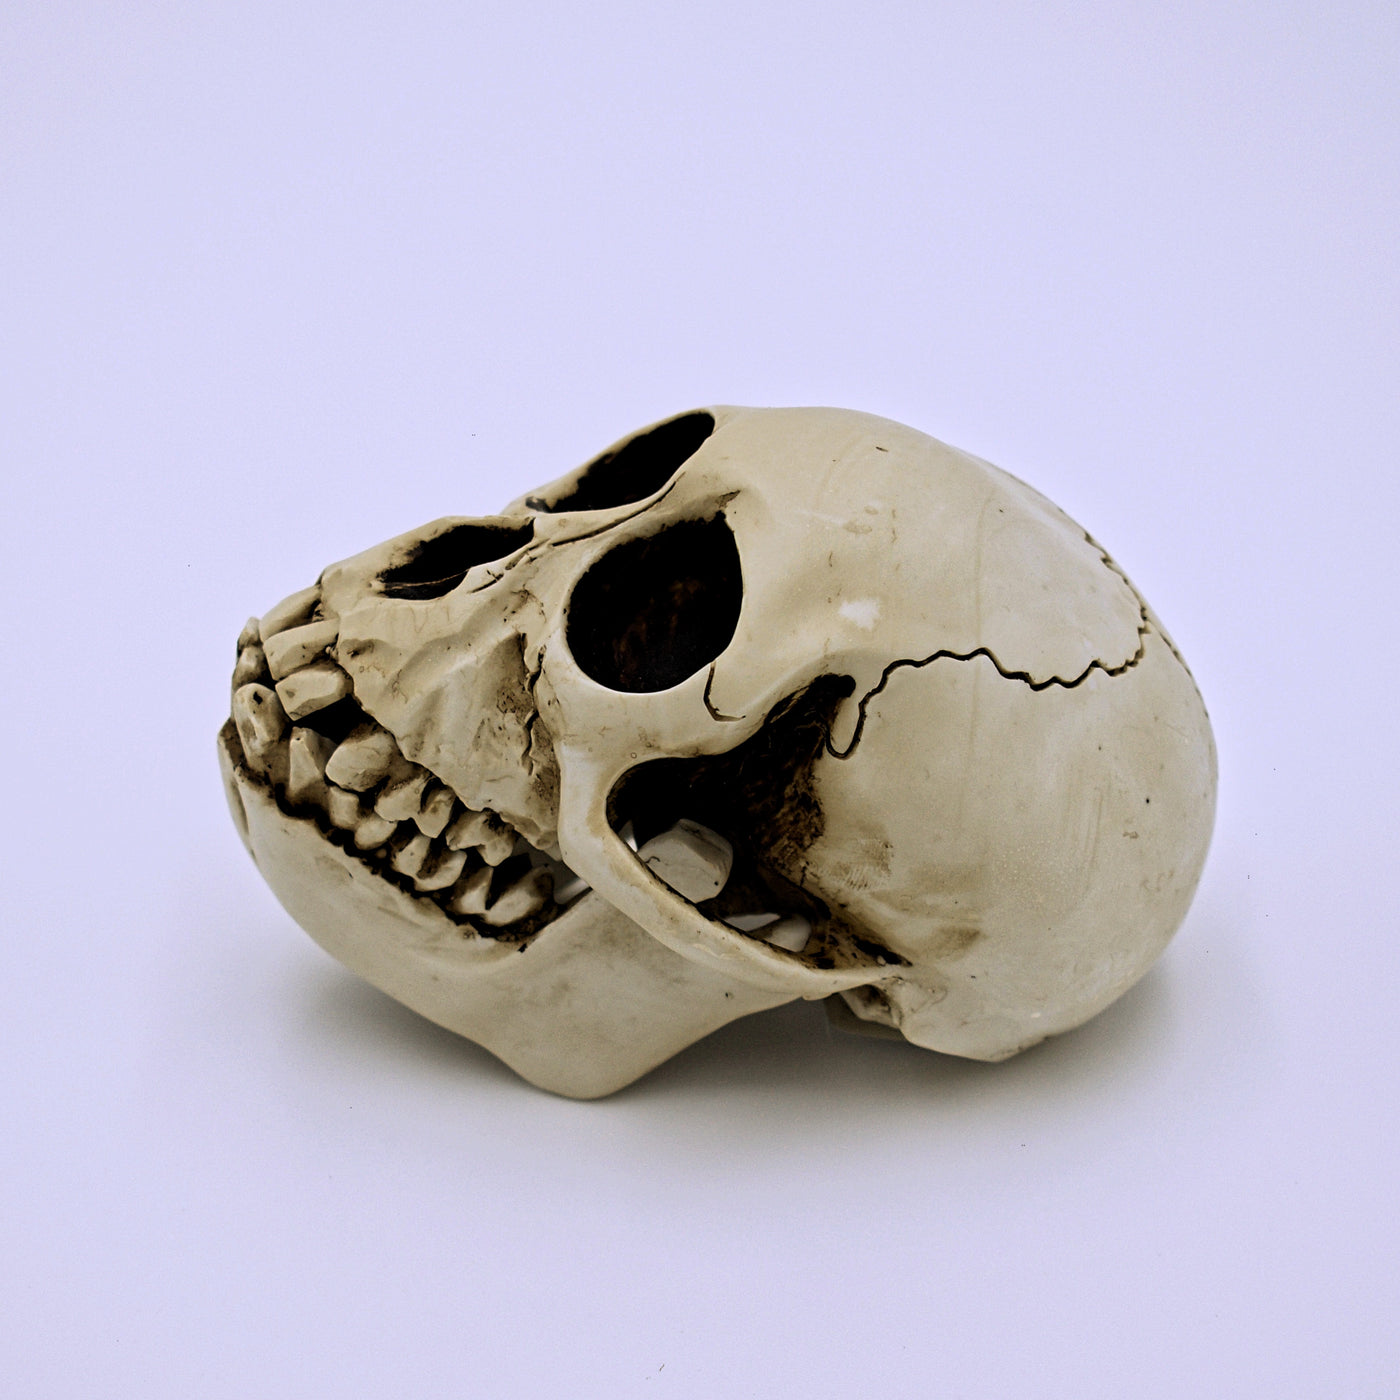 Monkey Skull Sculpture w/ Removable Jaw - The Cranio Collections